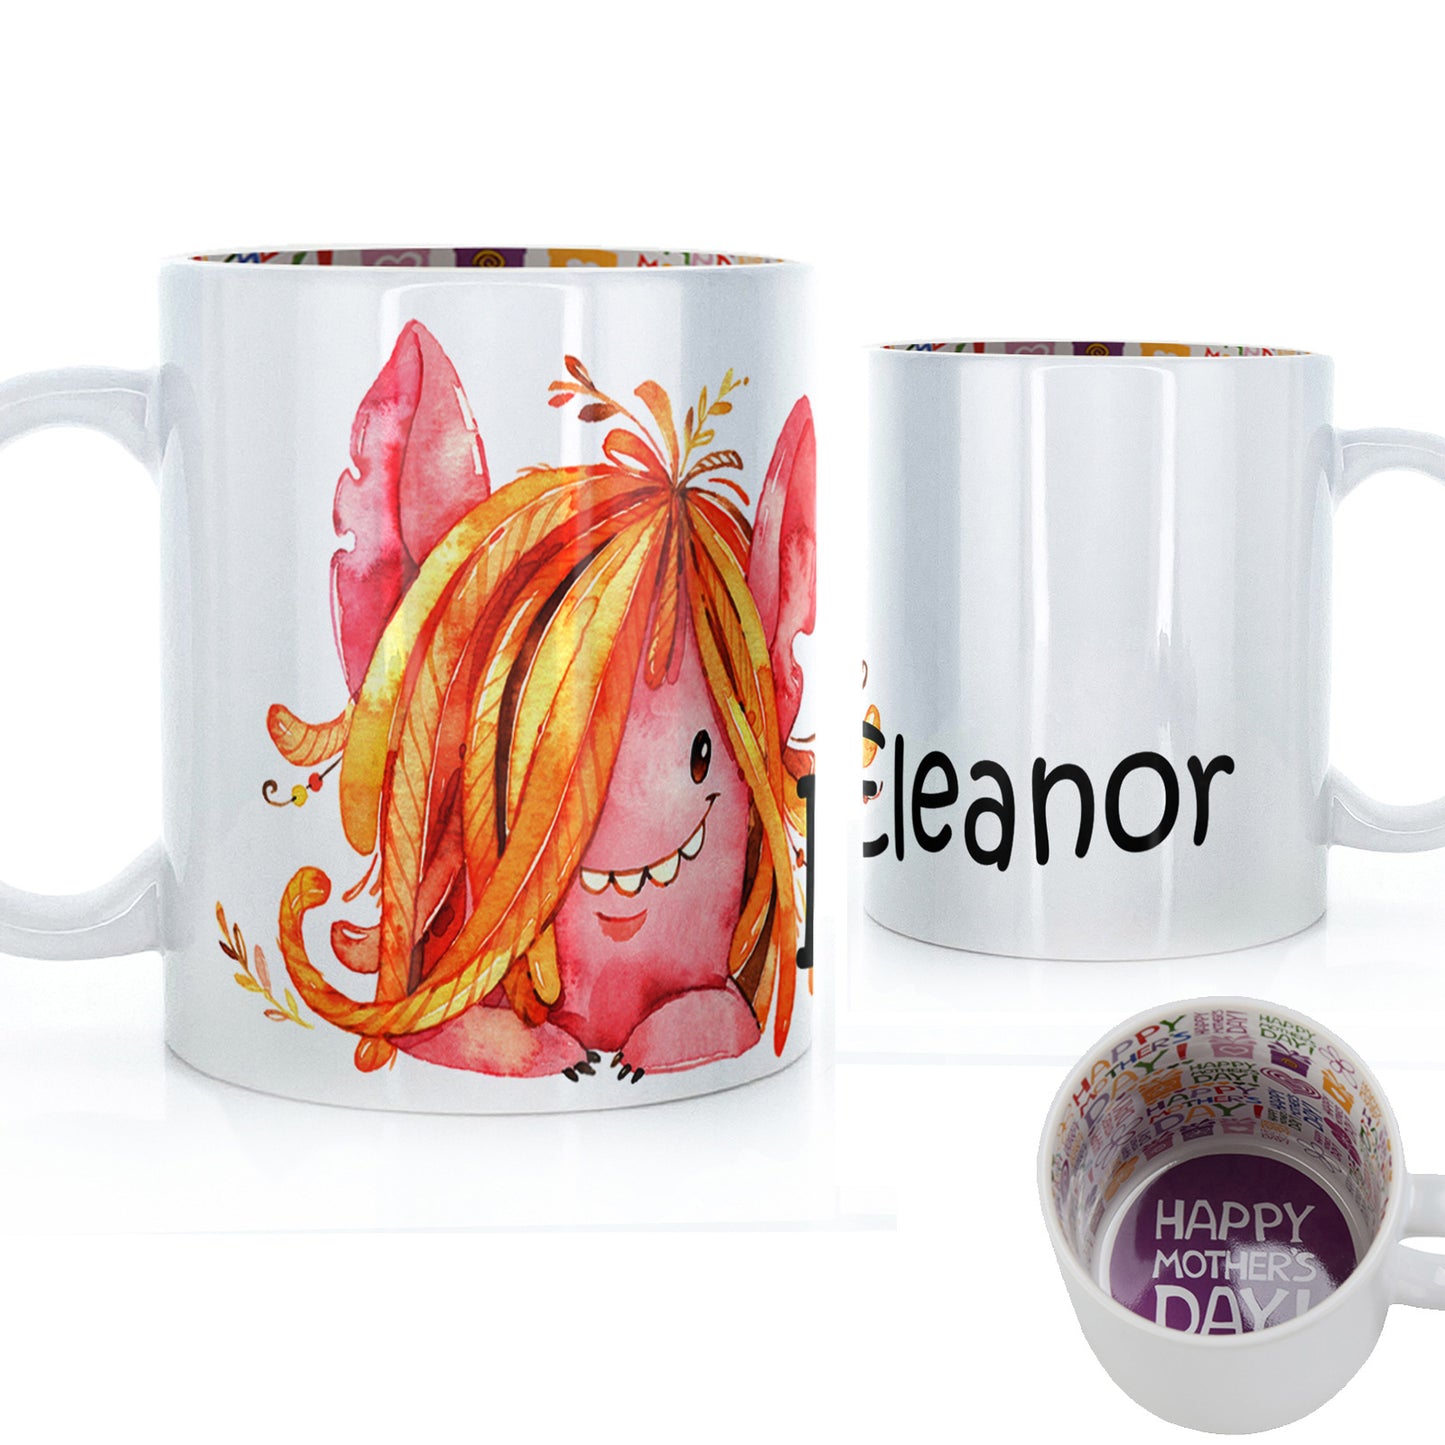 Personalised Mug with Childish Text and Hairy Red Monster